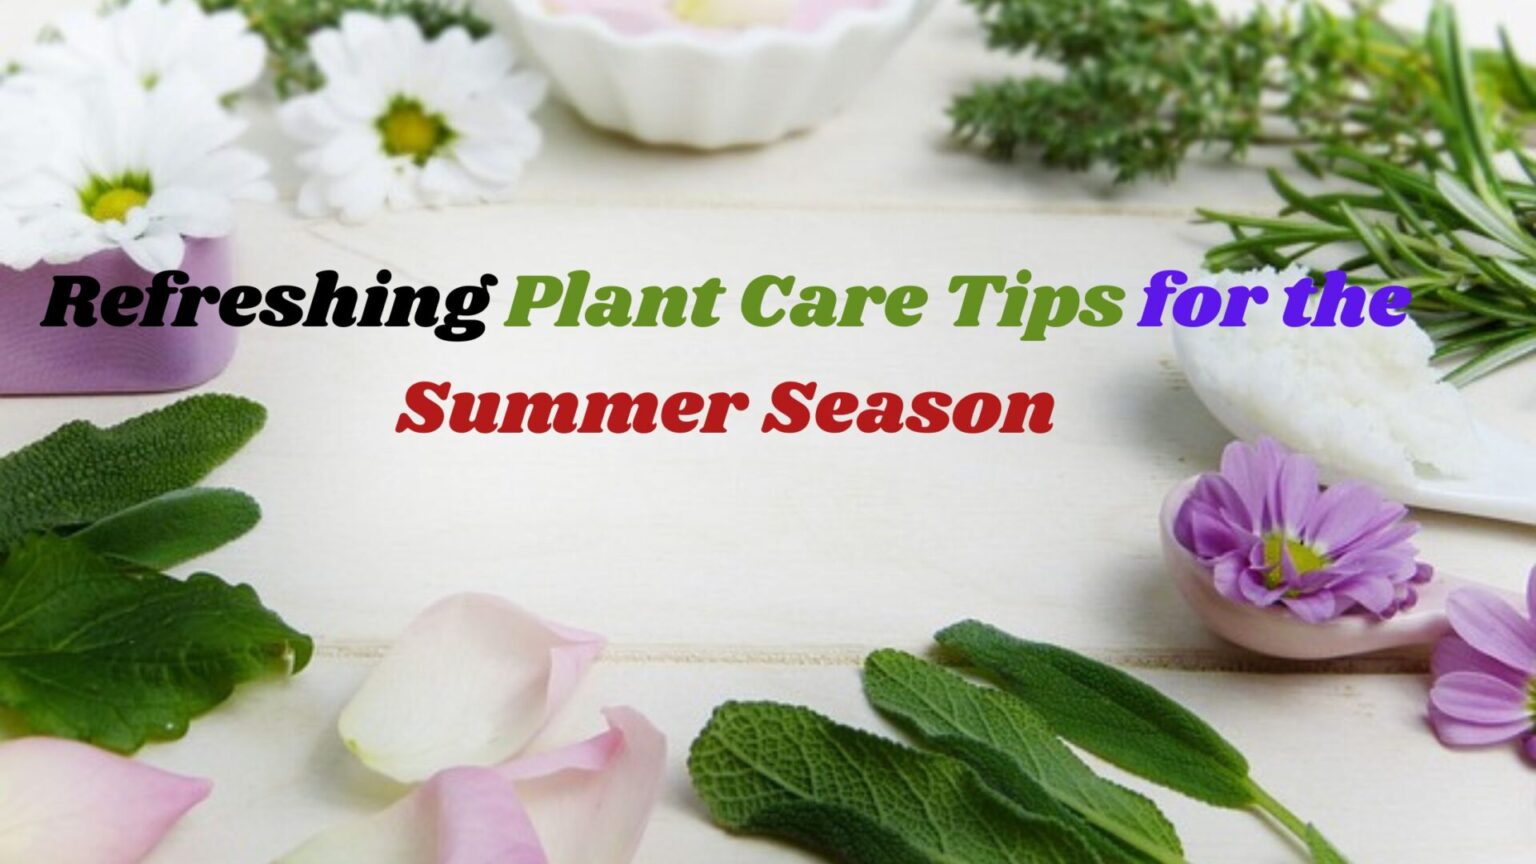 Refreshing Plant Care Tips for the Summer Season